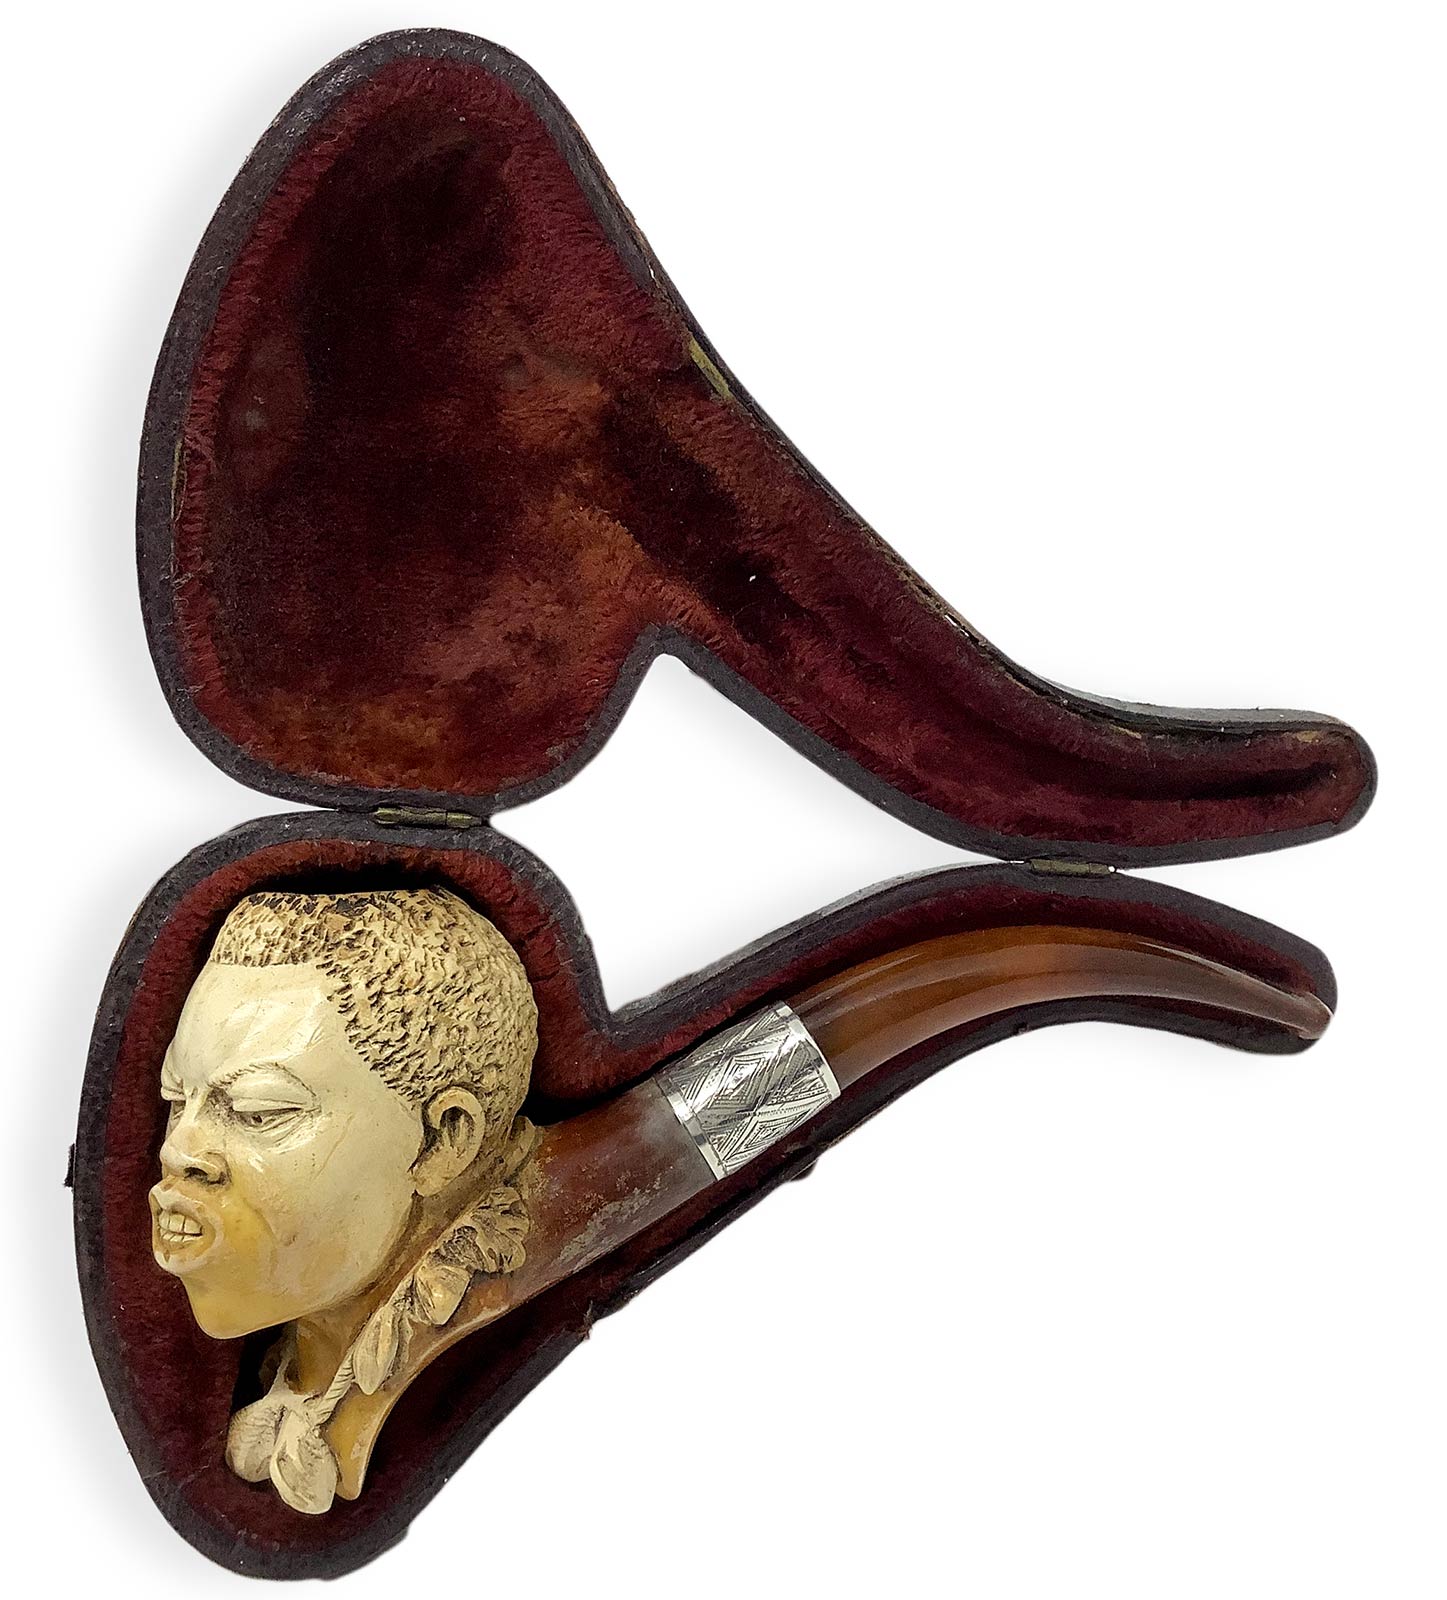 Pipe "African character" - Vienna, Austria. Late 1800s. The tobacco chamber and the shank of the - Image 3 of 5